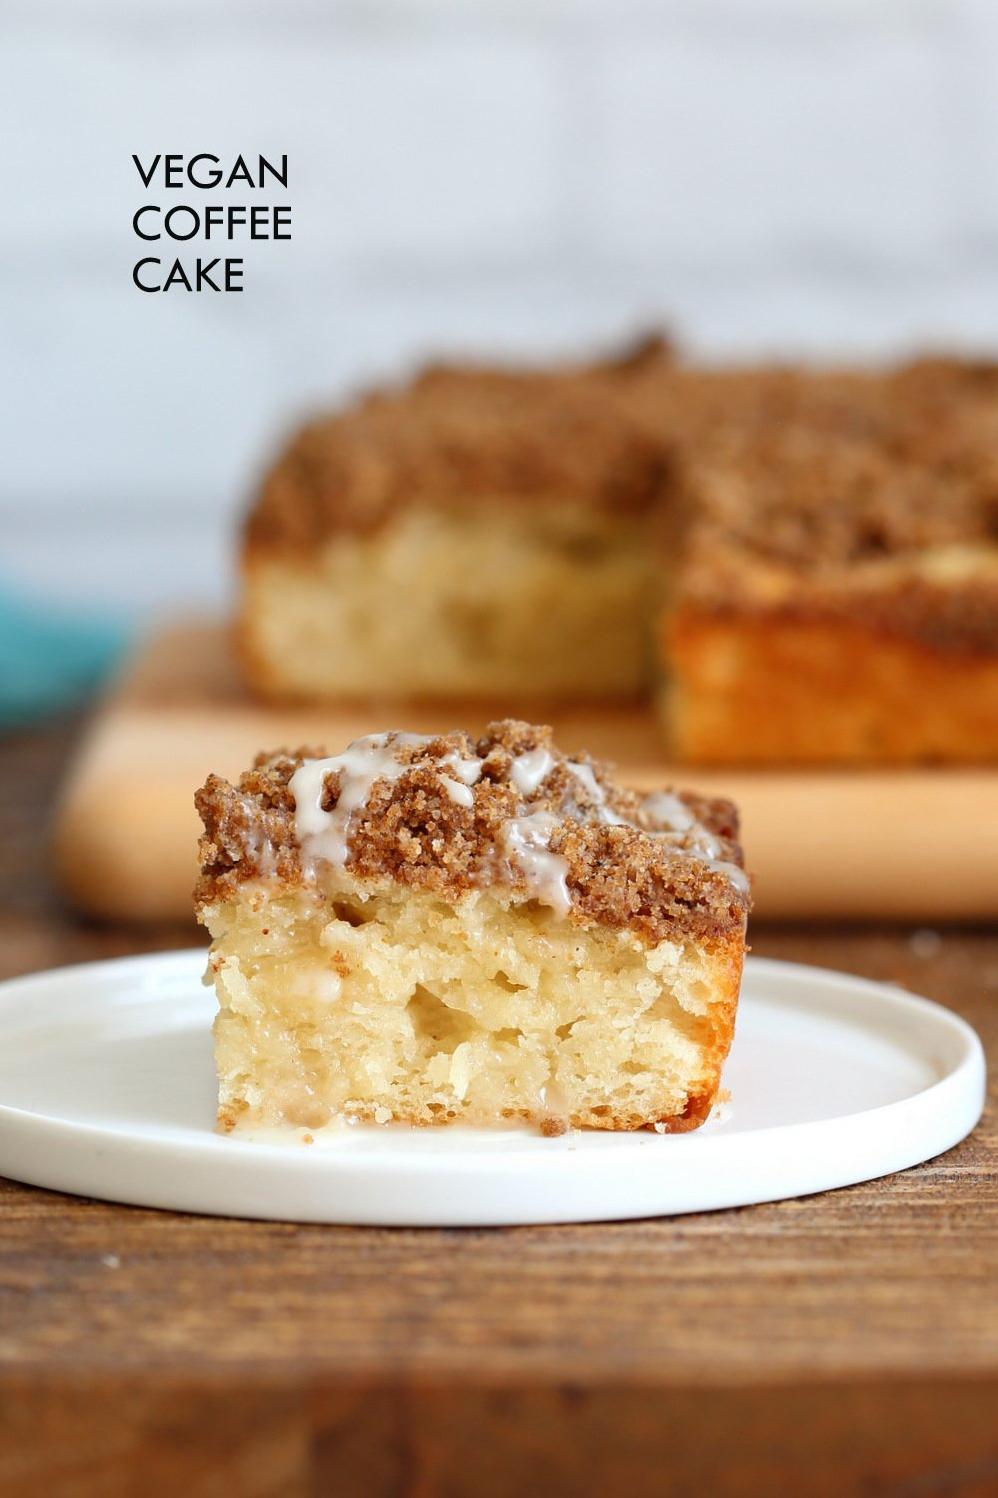  This Vegan Cinnamon Coffee Cake is the perfect dessert to enjoy with a warm cup of coffee.